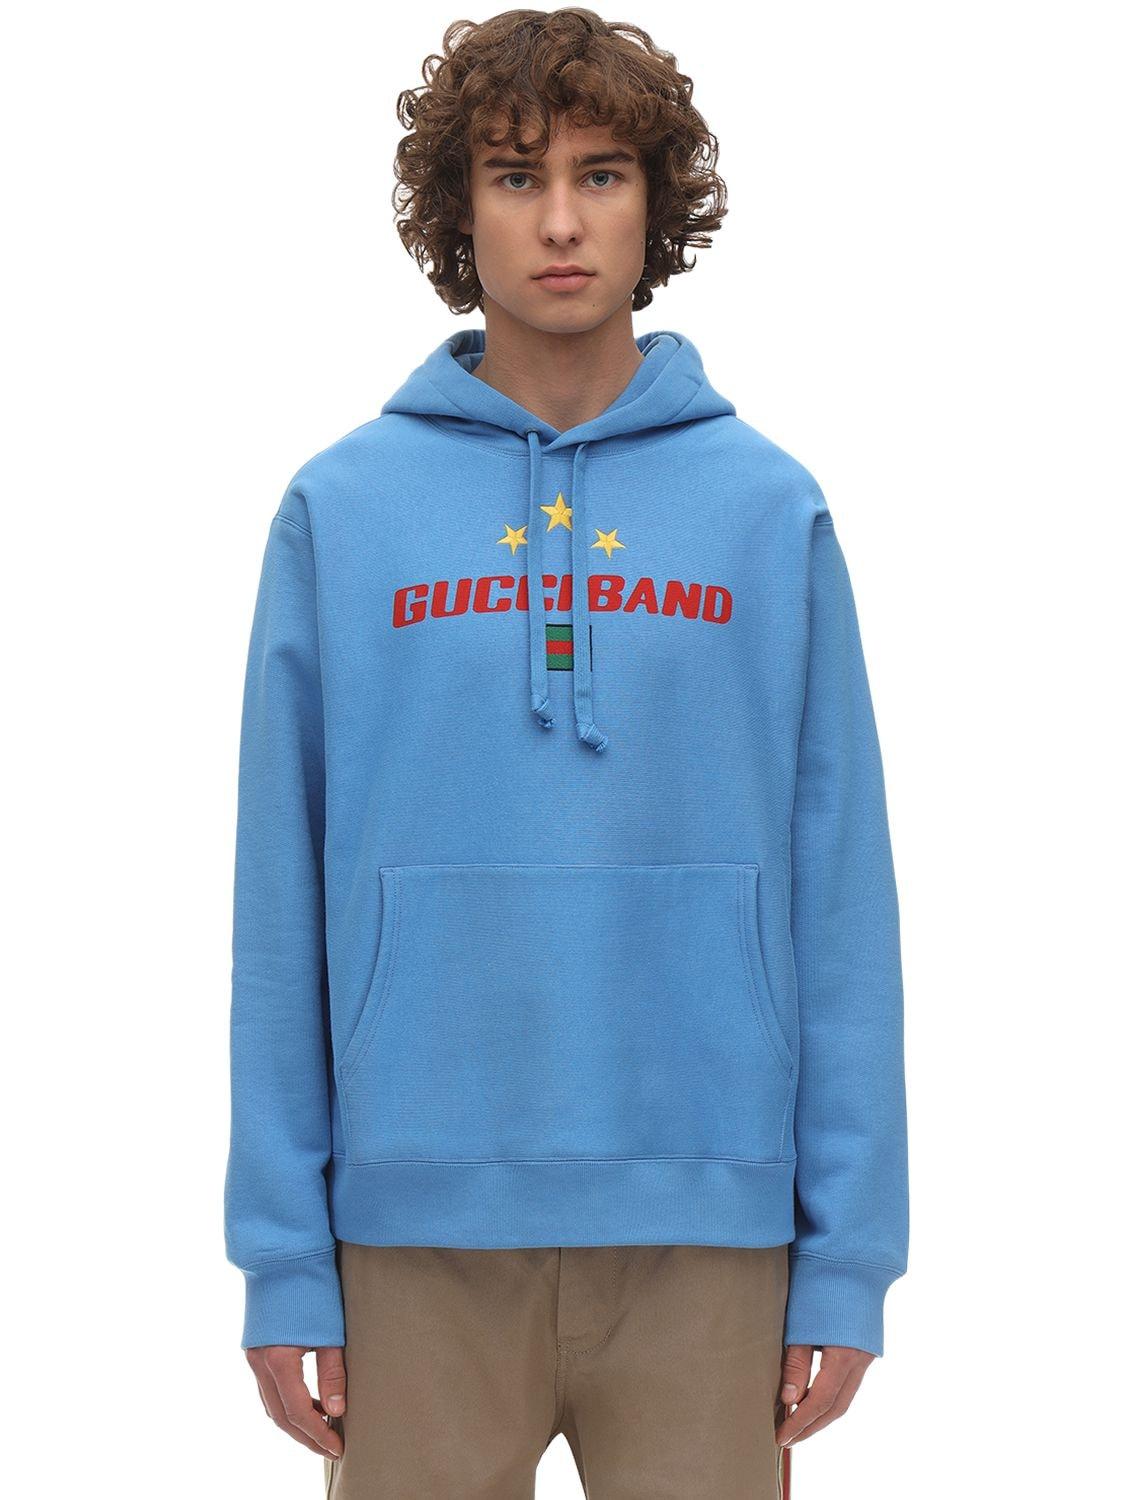 Gucci Cotton Band Print Hooded Sweatshirt in Blue for Men | Lyst